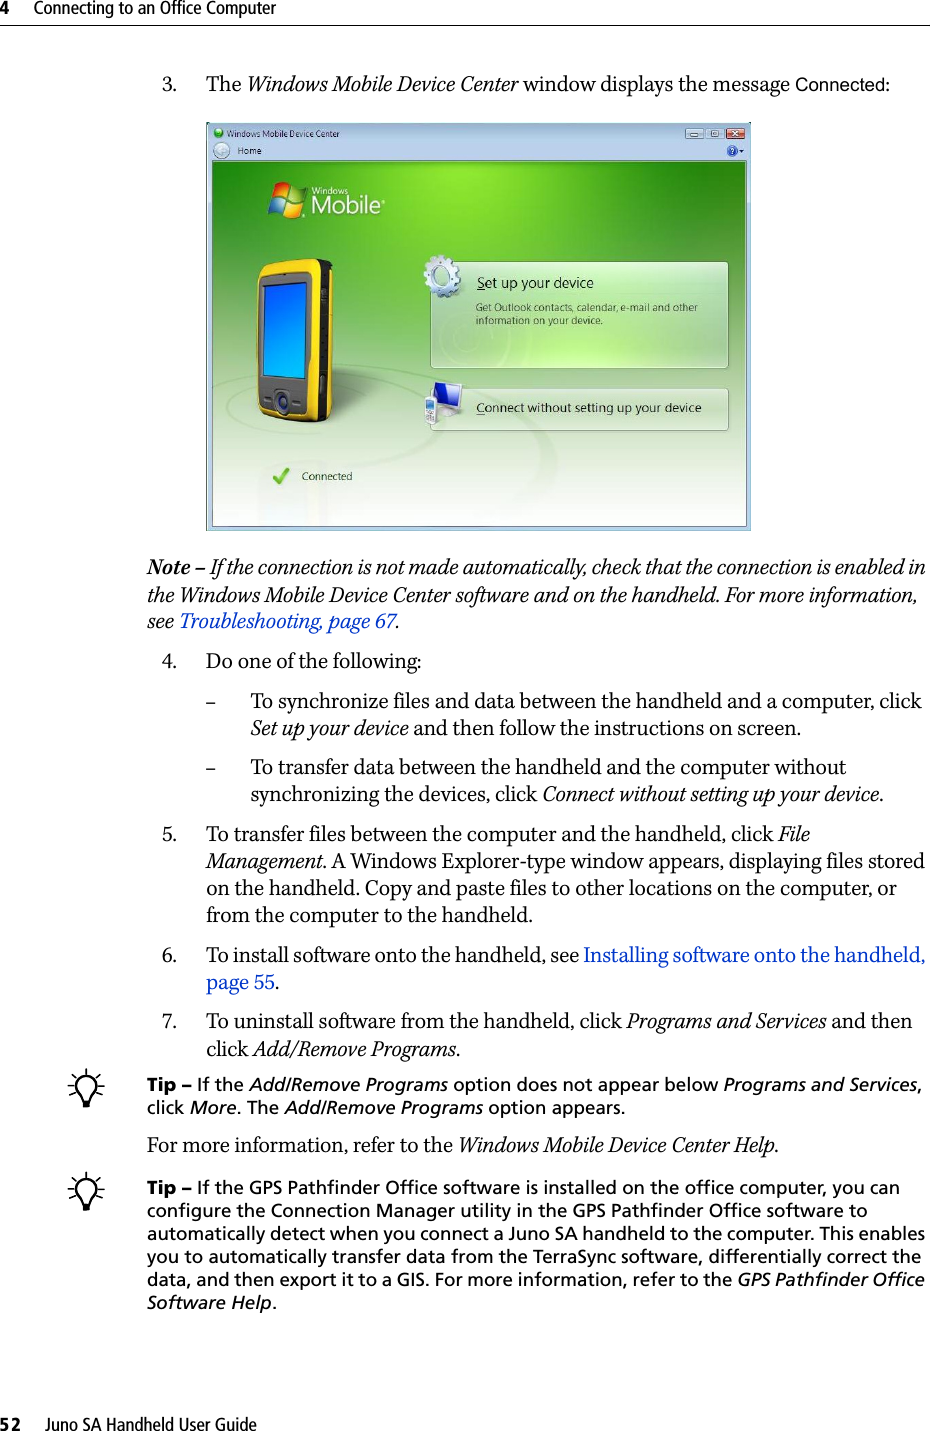 4     Connecting to an Office Computer52     Juno SA Handheld User Guide3. The Windows Mobile Device Center window displays the message Connected:  Note – If the connection is not made automatically, check that the connection is enabled in the Windows Mobile Device Center software and on the handheld. For more information, see Troubleshooting, page 67.4. Do one of the following:–To synchronize files and data between the handheld and a computer, click Set up your device and then follow the instructions on screen. –To transfer data between the handheld and the computer without synchronizing the devices, click Connect without setting up your device.5. To transfer files between the computer and the handheld, click File Management. A Windows Explorer-type window appears, displaying files stored on the handheld. Copy and paste files to other locations on the computer, or from the computer to the handheld.6. To install software onto the handheld, see Installing software onto the handheld, page 55.7. To uninstall software from the handheld, click Programs and Services and then click Add/Remove Programs.BTip – If the Add/Remove Programs option does not appear below Programs and Services, click More. The Add/Remove Programs option appears.For more information, refer to the Windows Mobile Device Center Help. BTip – If the GPS Pathfinder Office software is installed on the office computer, you can configure the Connection Manager utility in the GPS Pathfinder Office software to automatically detect when you connect a Juno SA handheld to the computer. This enables you to automatically transfer data from the TerraSync software, differentially correct the data, and then export it to a GIS. For more information, refer to the GPS Pathfinder Office Software Help.